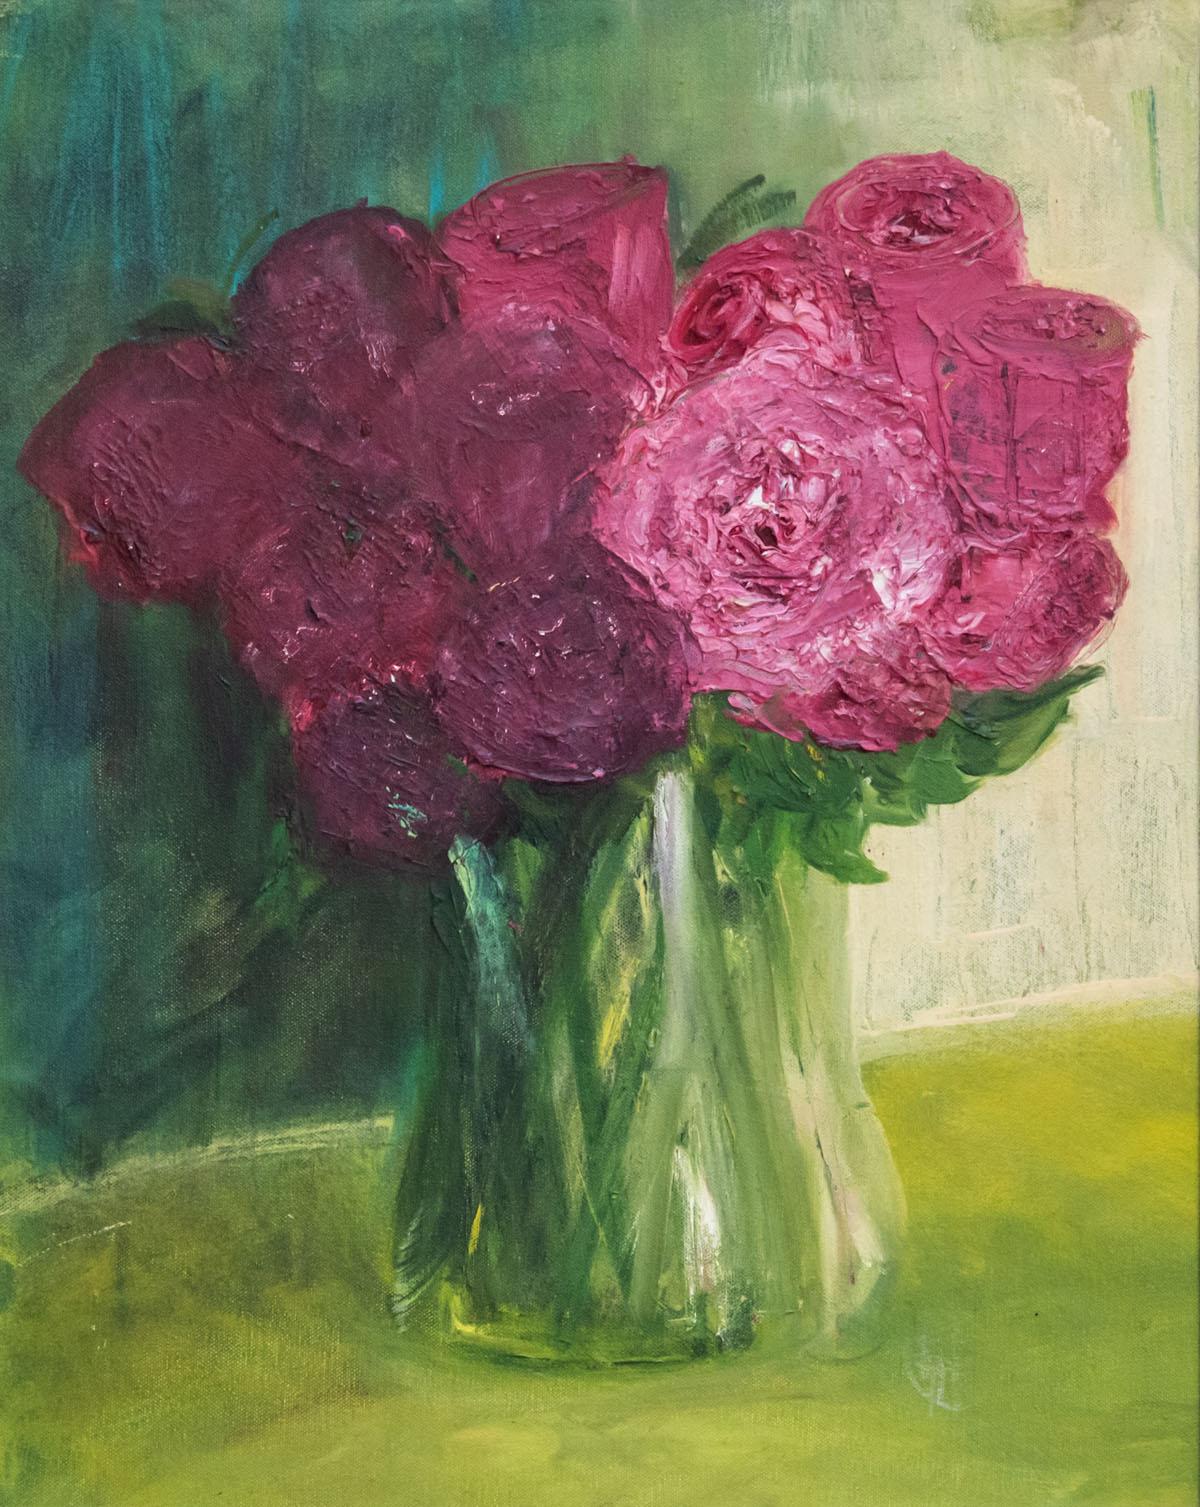 Henrietta Caledon
Pink Roses
Framed Original Oil Painting
Oil on Canvas Board
Canvas Size: H 48cm x W 38cm
Framed Size: H 68cm x W 57cm
Signed by the artist
Please note that the images of this piece in situ are only an example.

Pink Roses is an